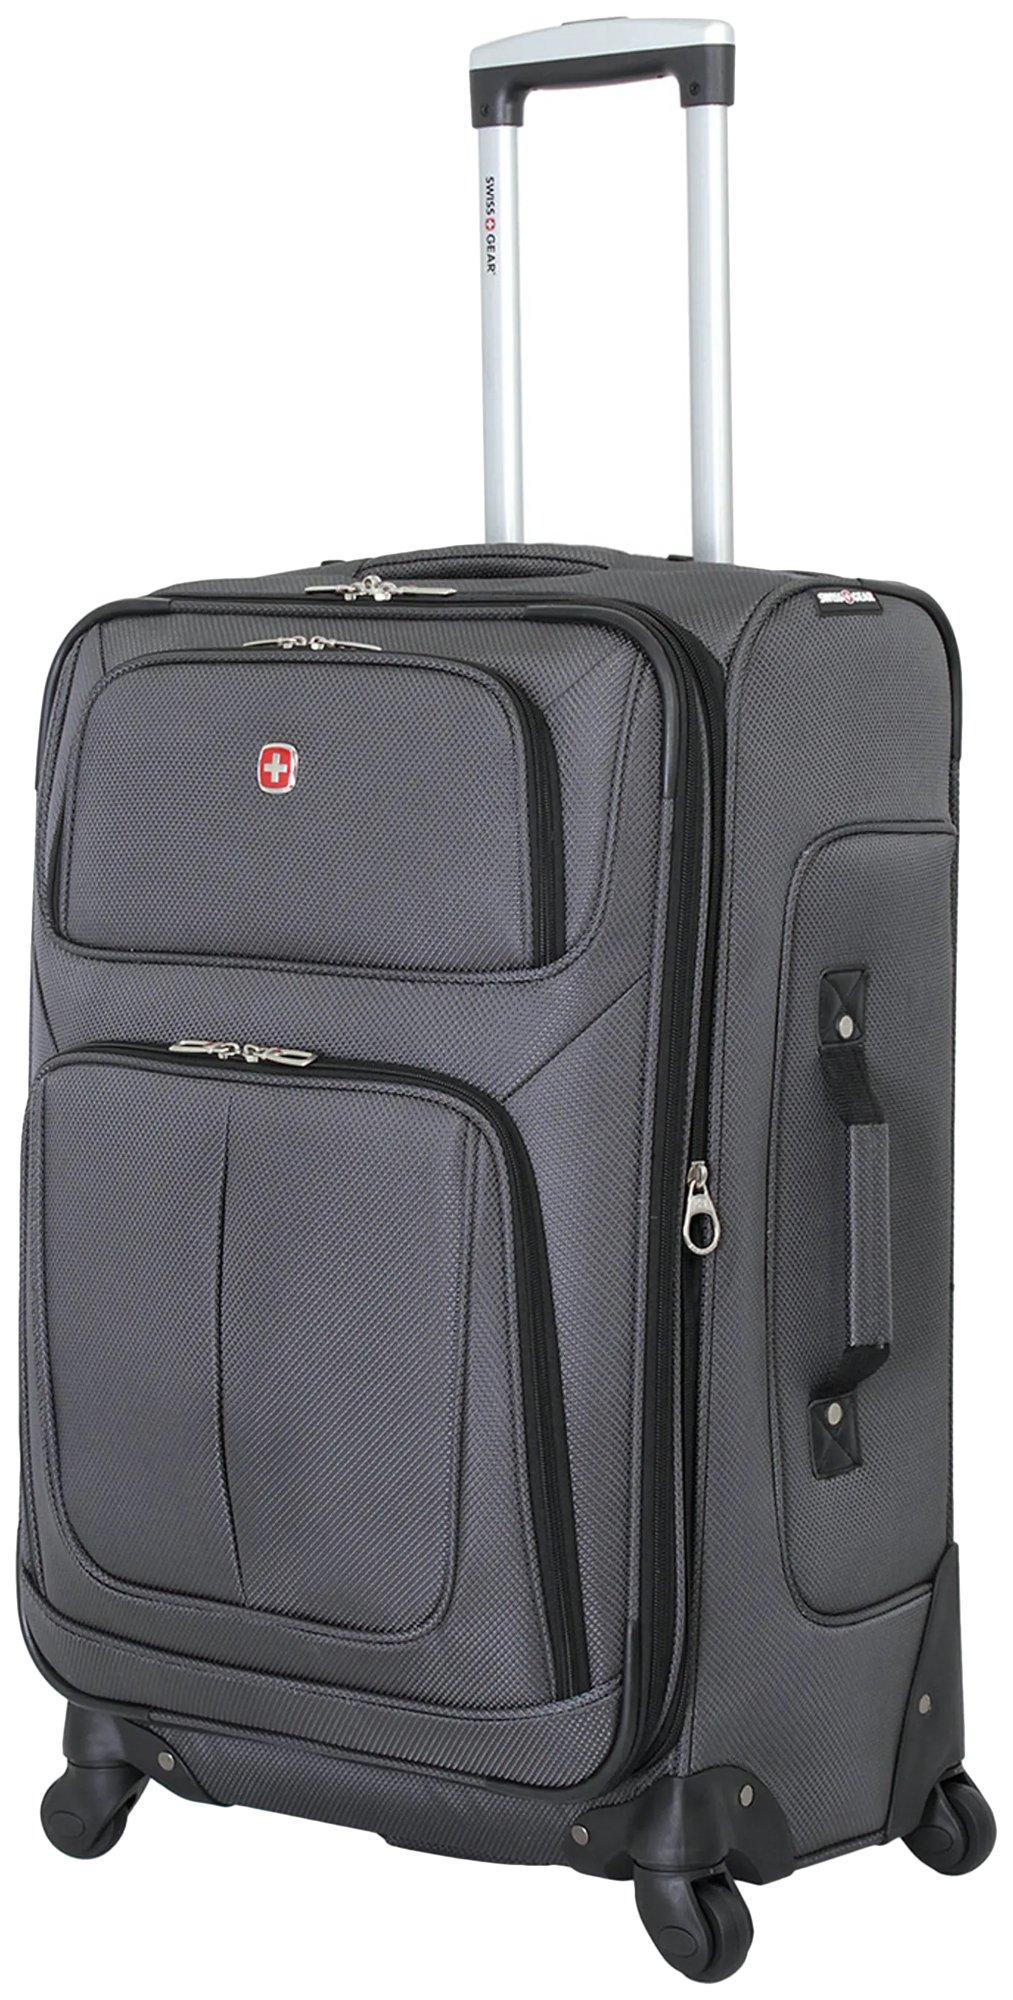 25'' Expandable Spinner Luggage